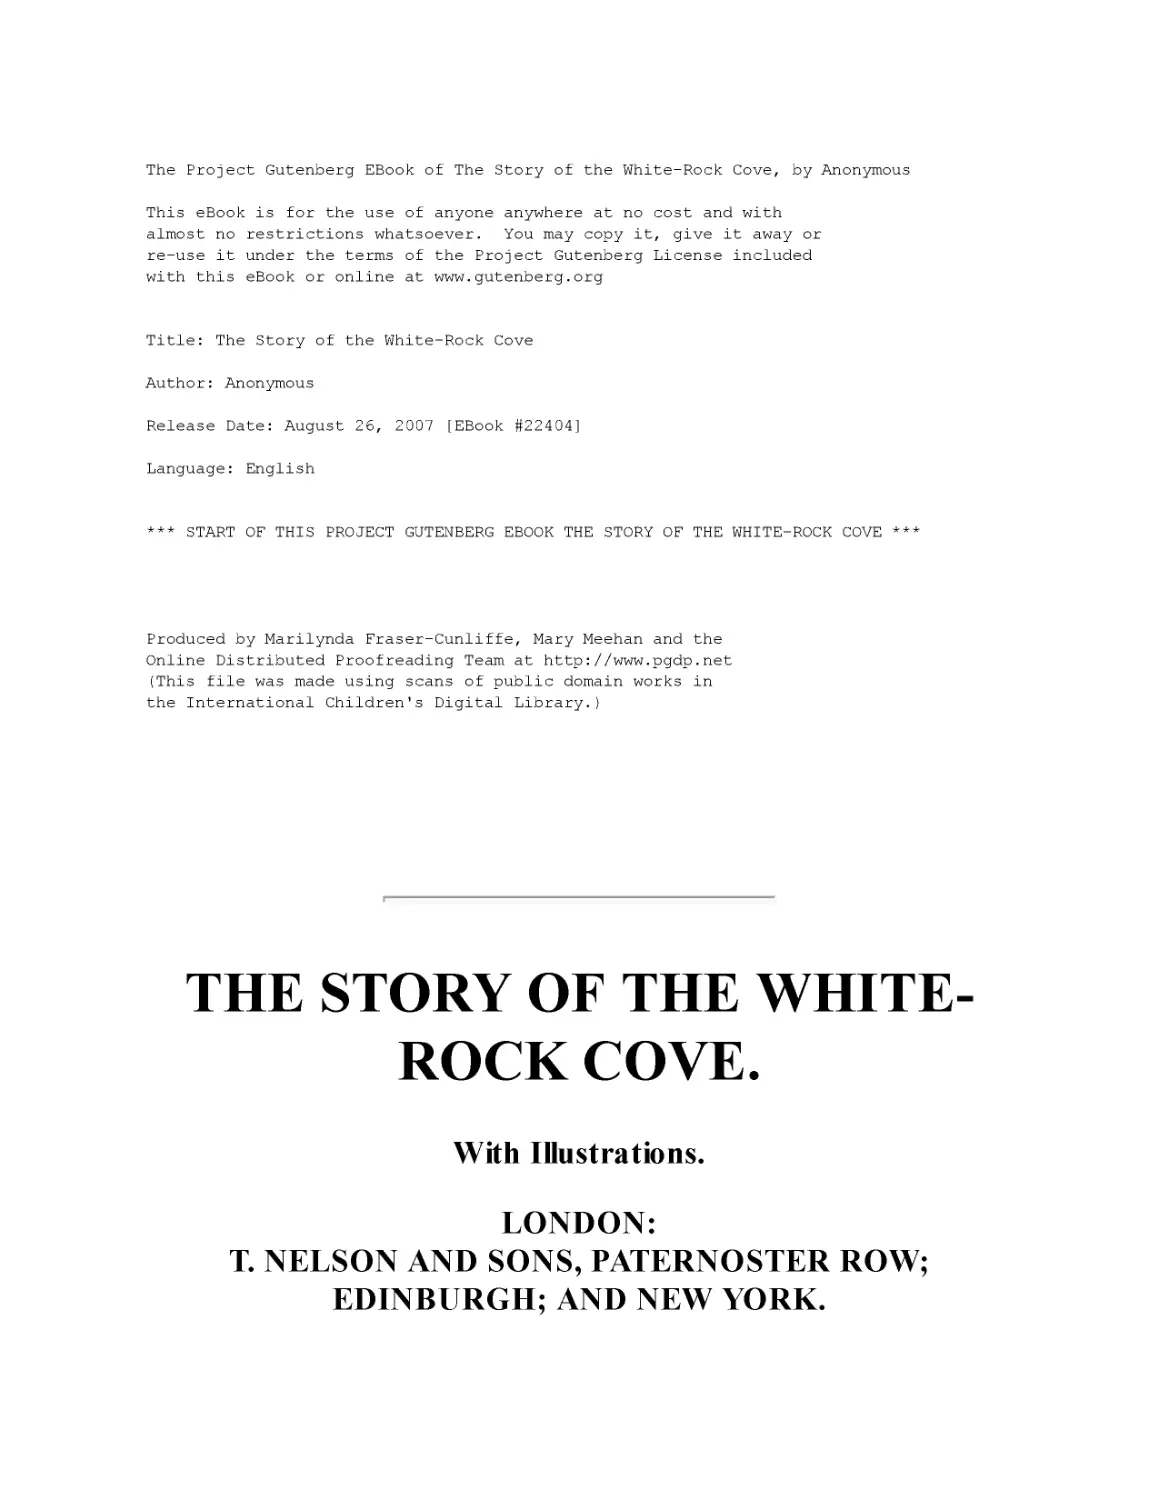 ﻿THE STORY OF THE WHITE-ROCK COVE
﻿With Illustrations. LONDON: T. NELSON AND SONS, PATERNOSTER ROW; EDINBURGH; AND NEW YORK. 1871